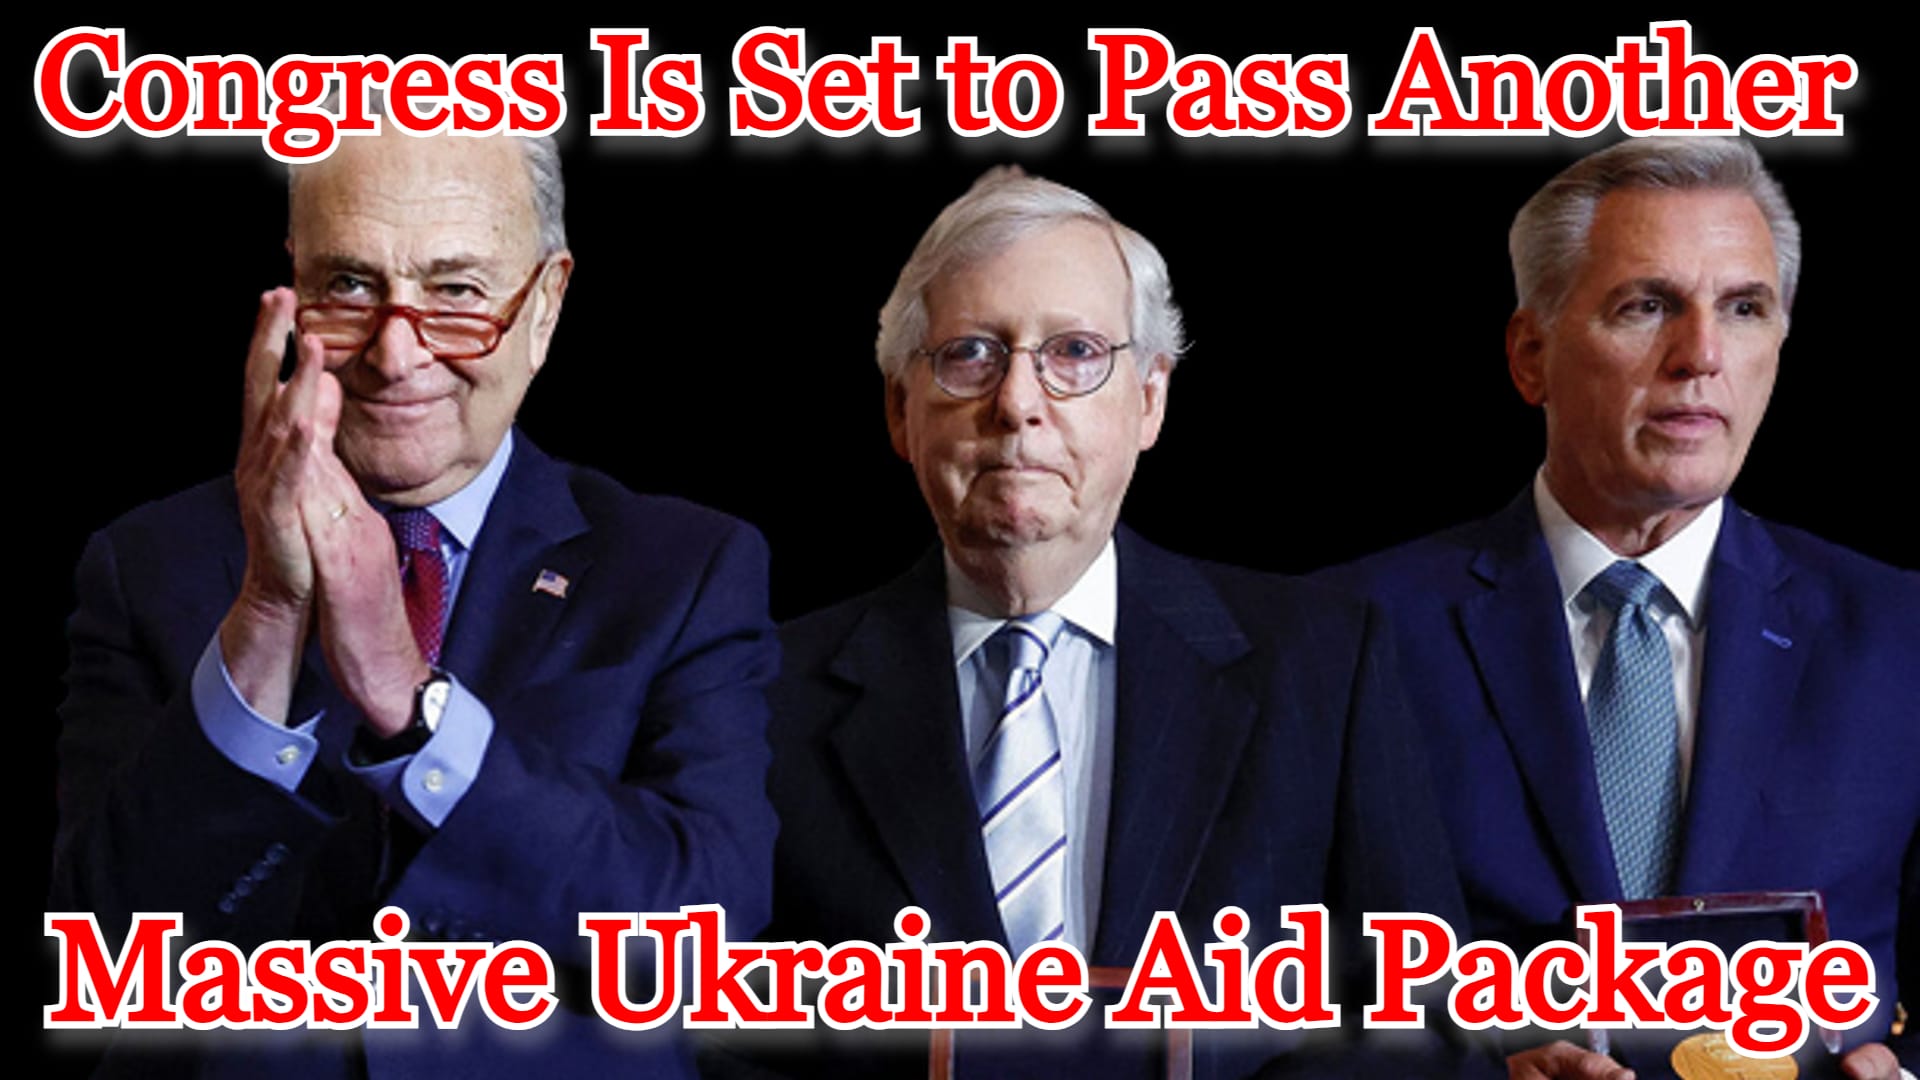 COI #479: Congress Is Set to Pass Another Massive Ukraine Aid Package